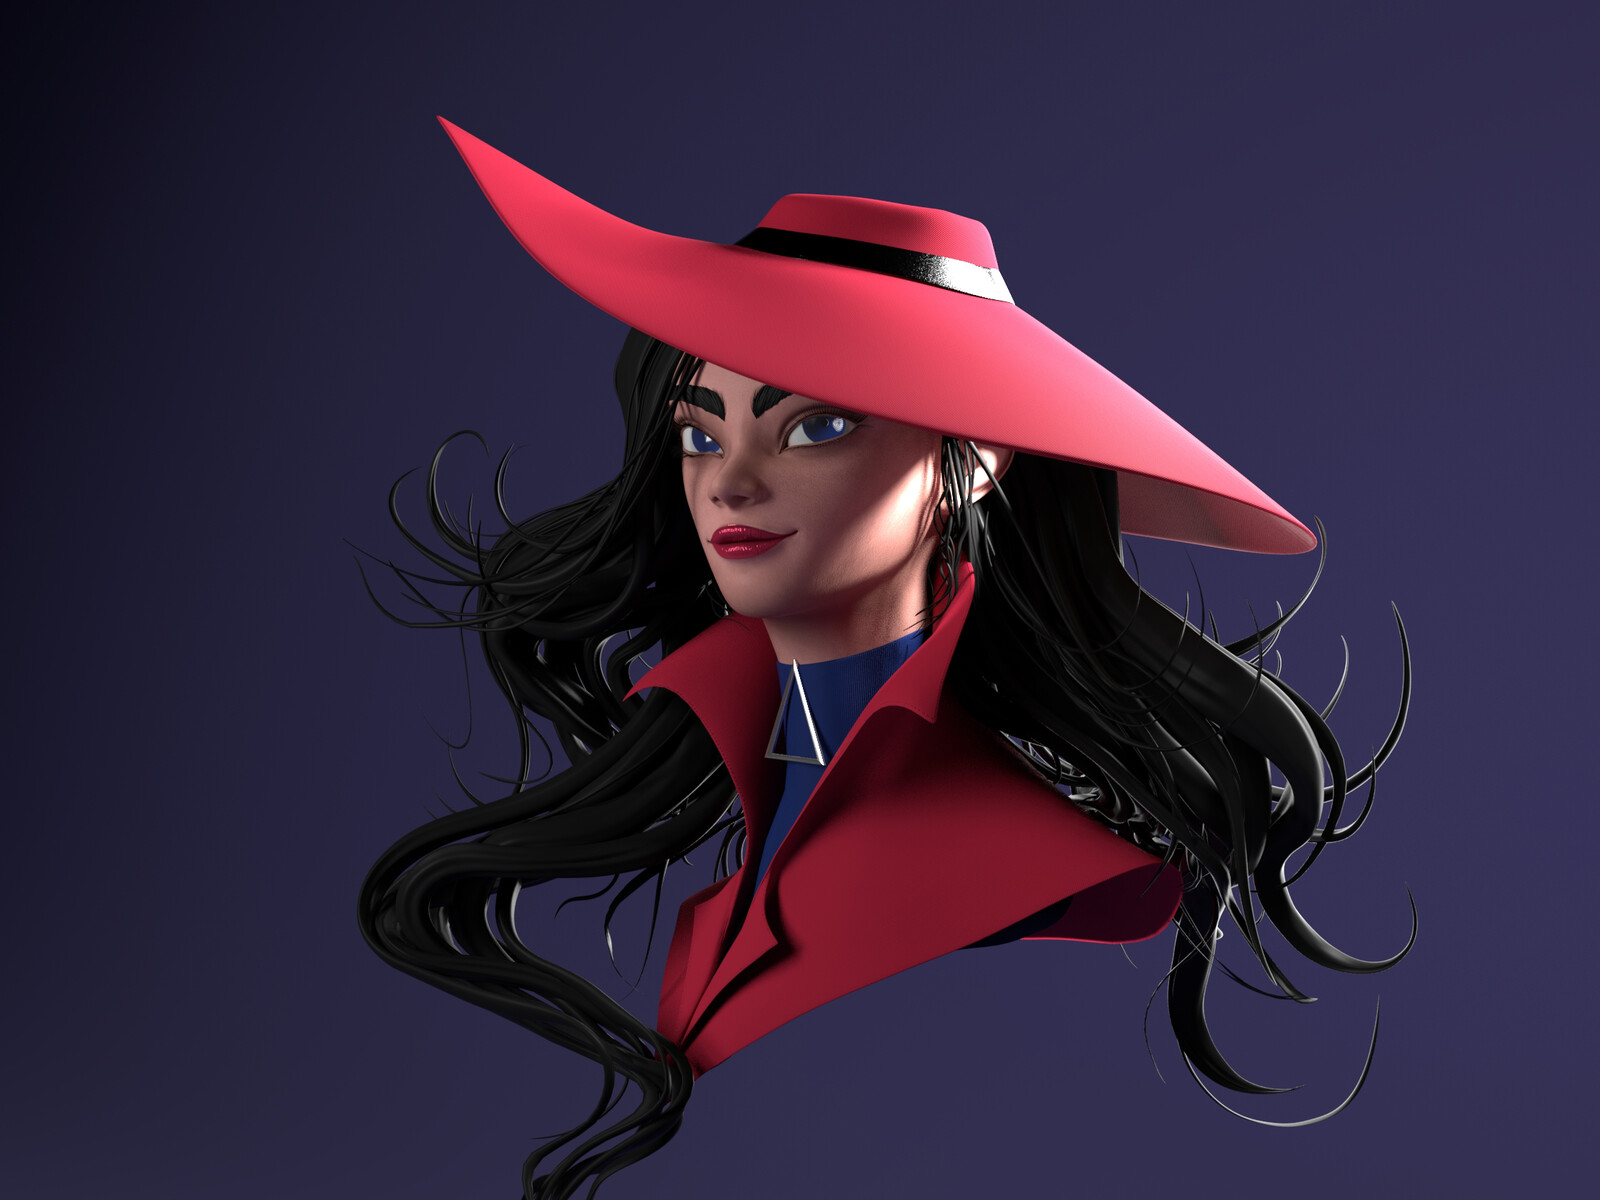 Carmen Sandiego- 3D Artwork based on a concept by Mioree.